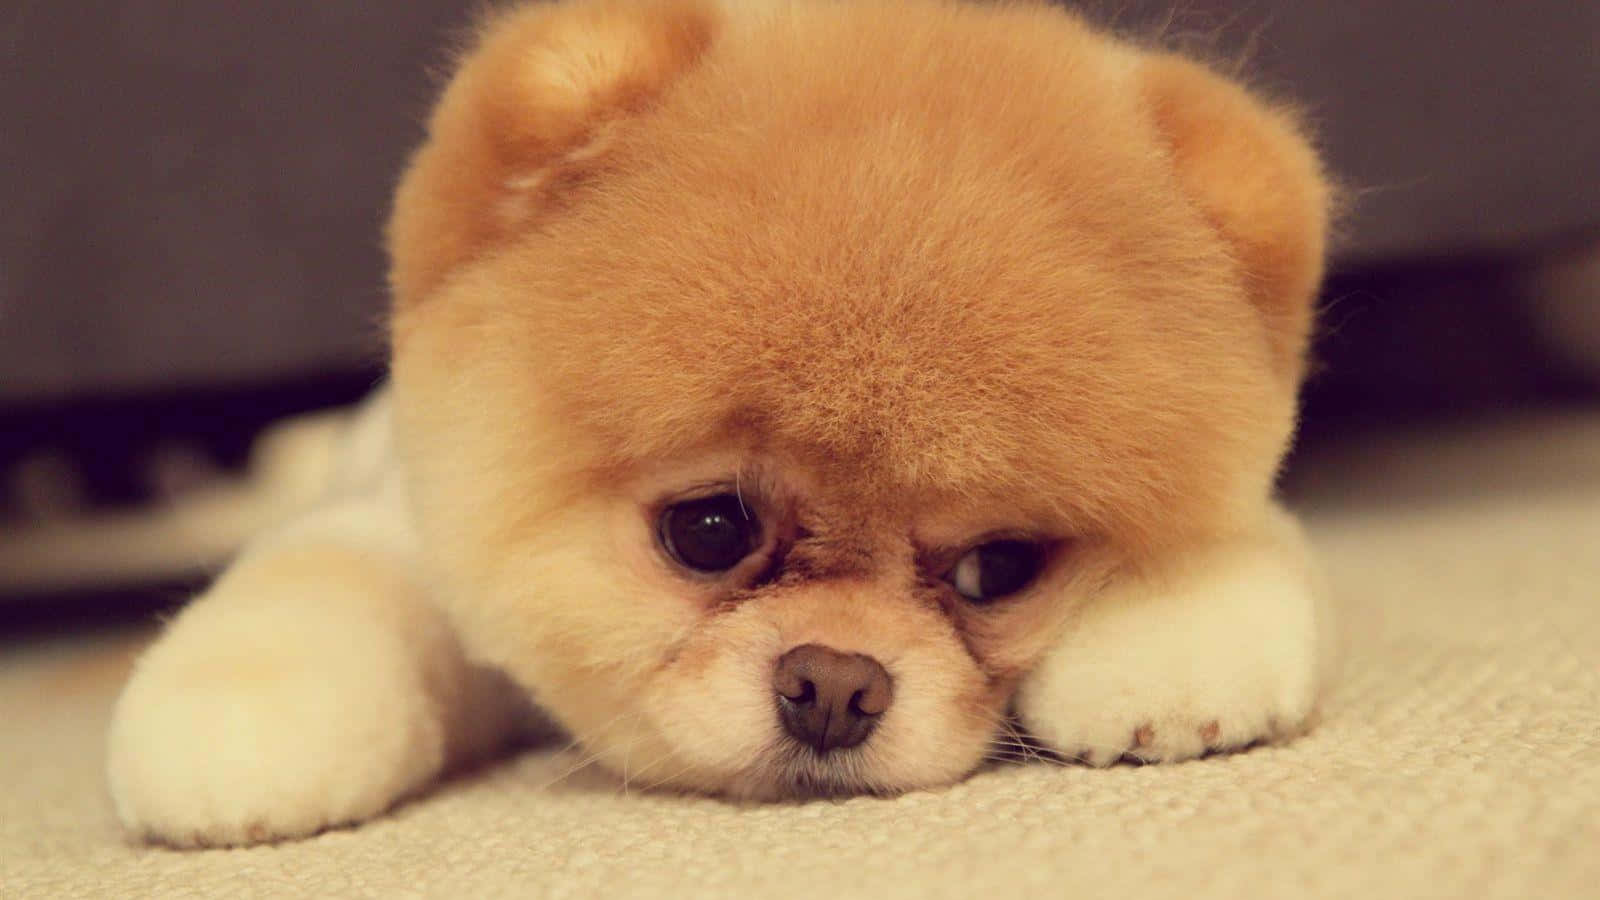 Sad-Looking Pomeranian Puppy Picture